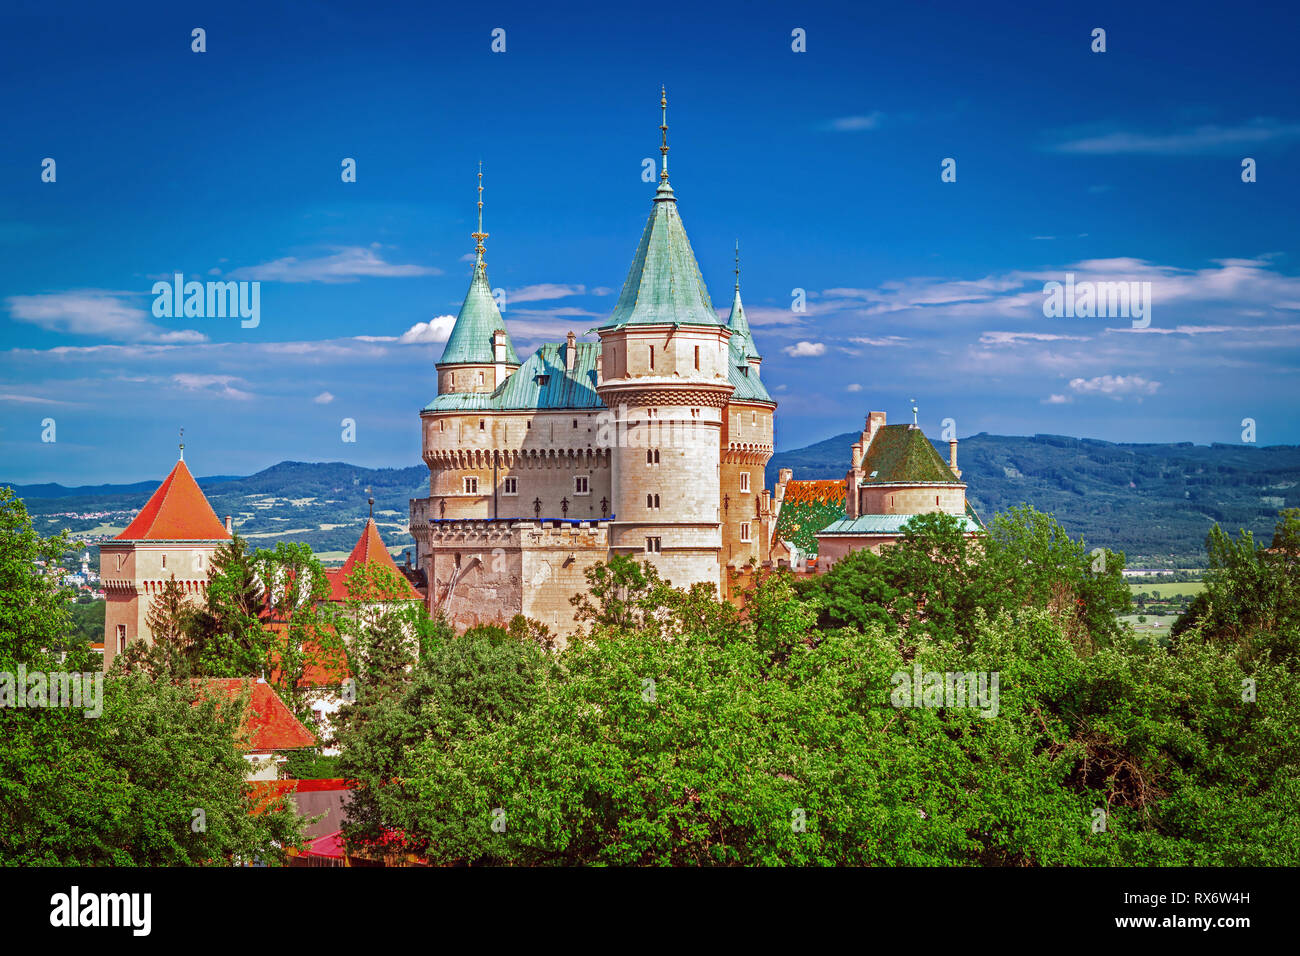 Bojnice Castle Slovakia High Resolution Stock Photography and Images